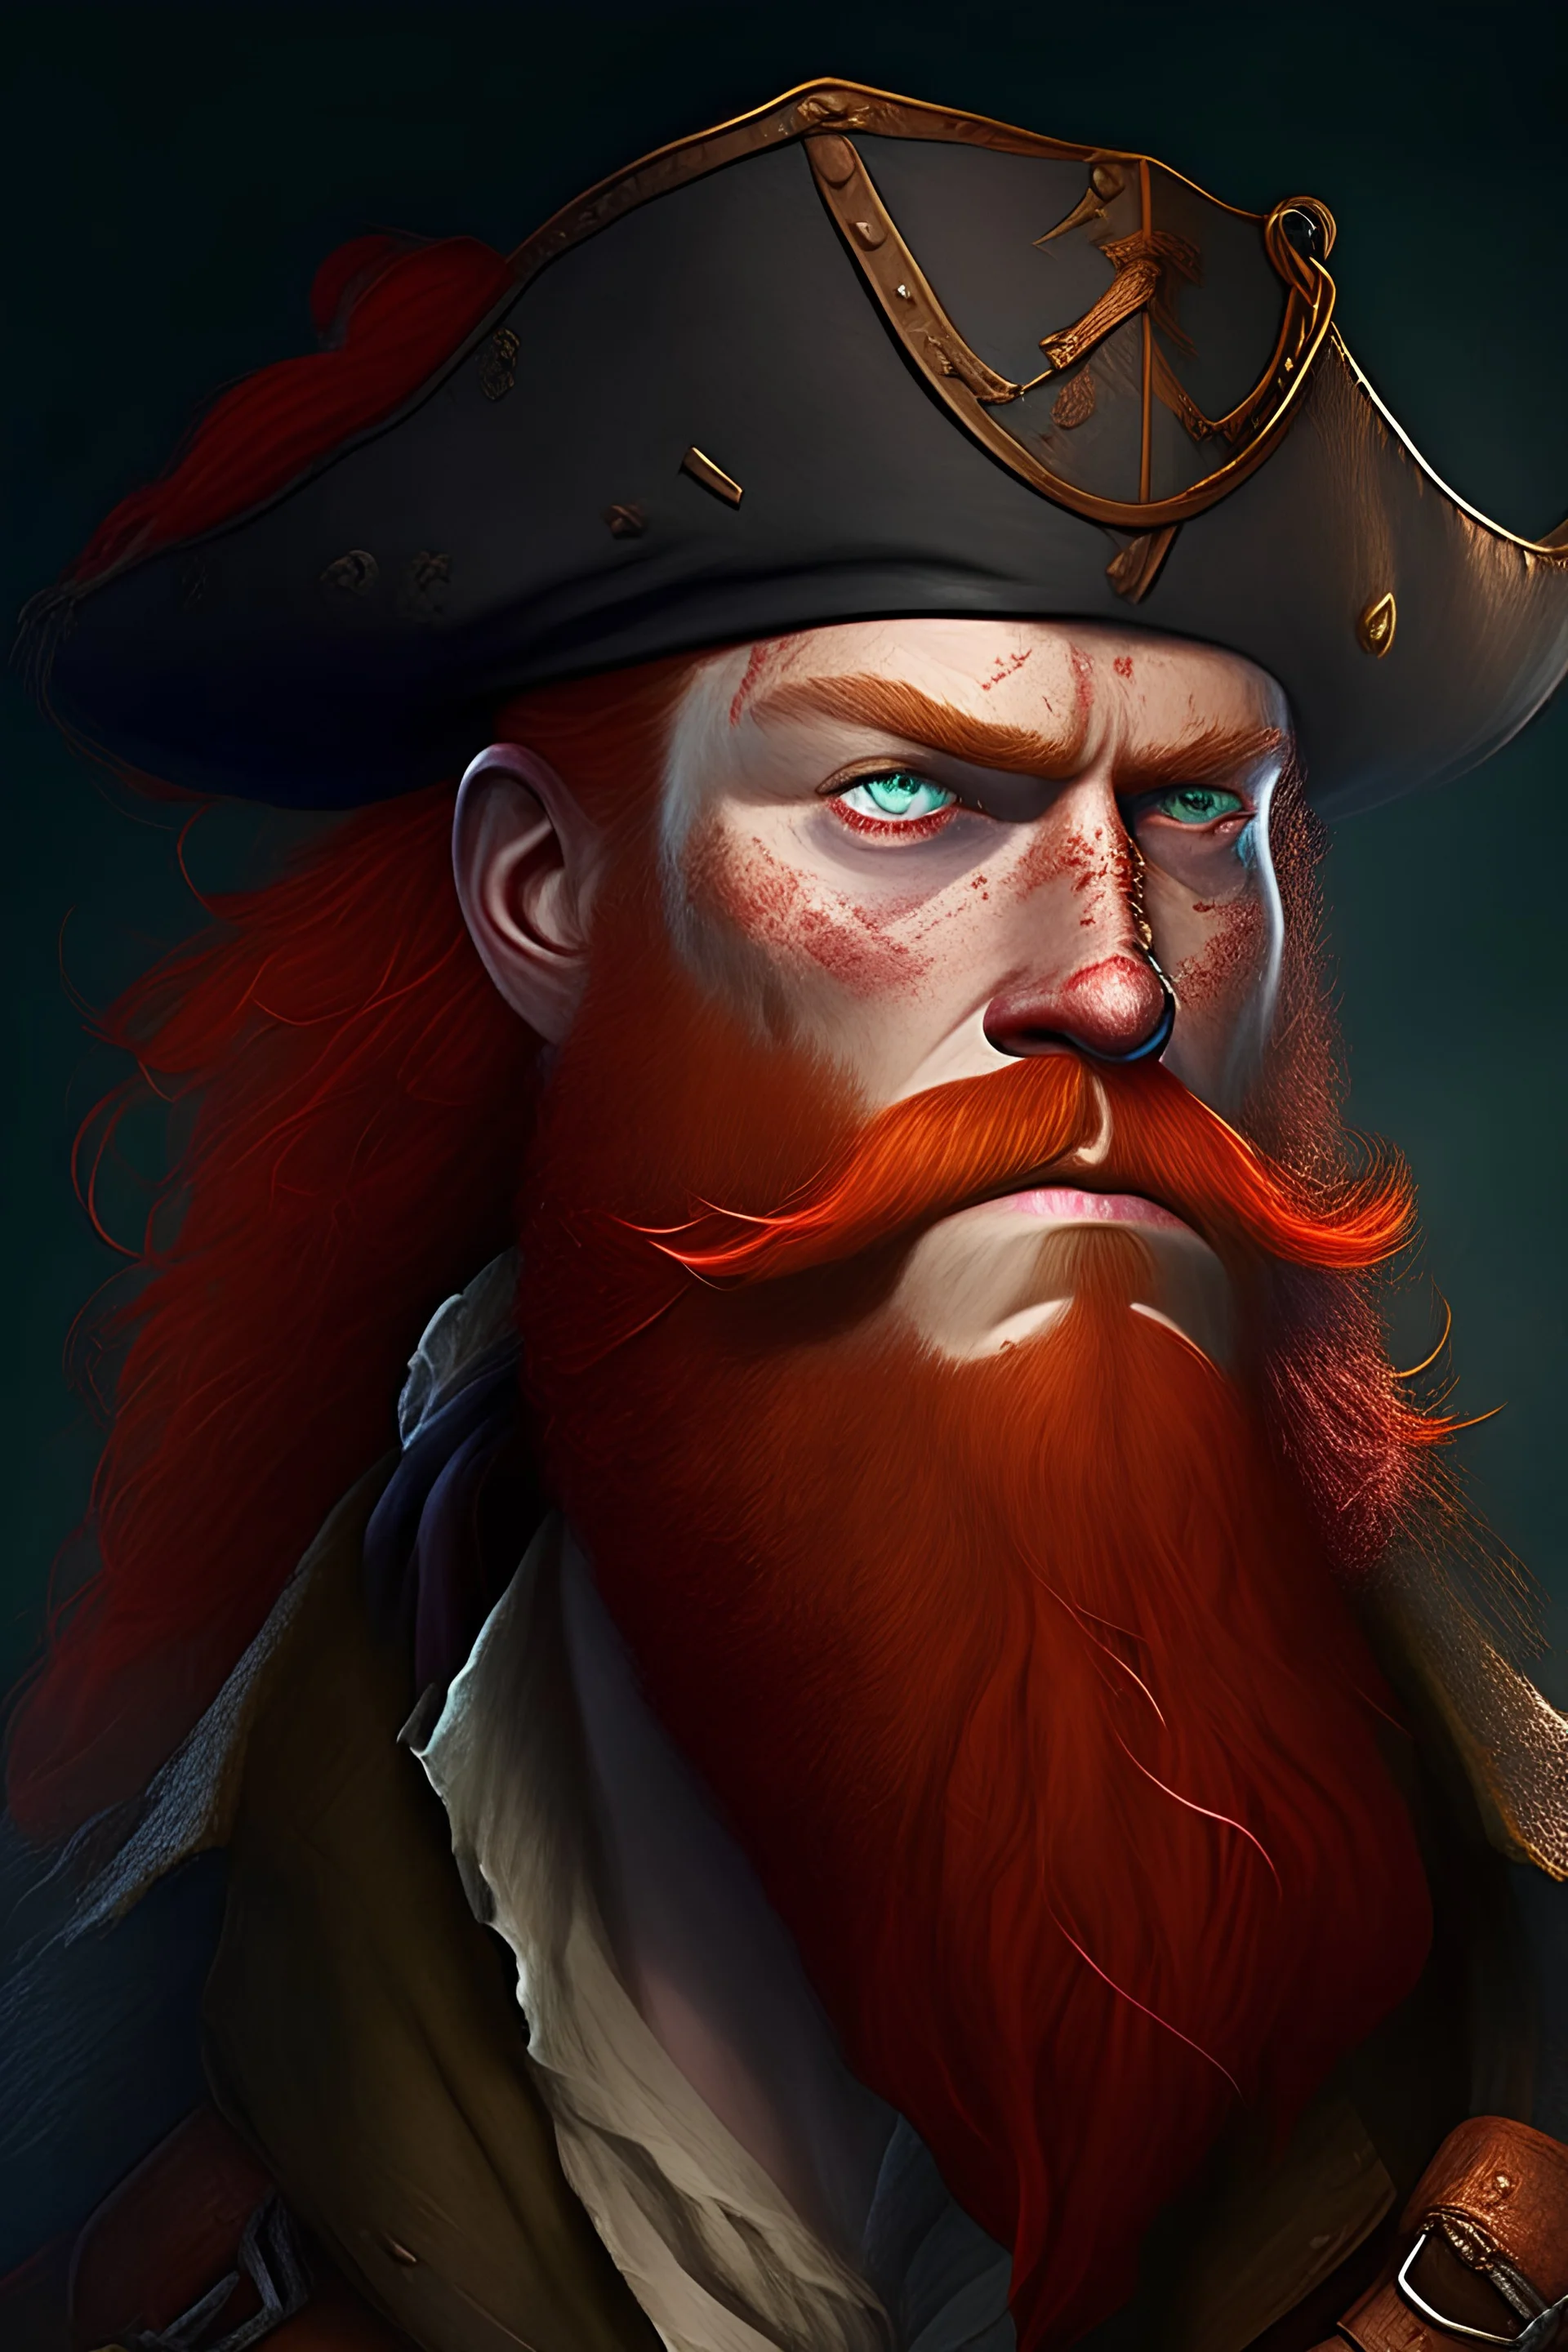 Create a portrait of an extremely strong pirate named Shanks. He's red-haired, with a thick beard and one eye covered in a prominent scar. His expression is determined and courageous, conveying a mixture of bravery and wisdom. Dress him in a classic pirate outfit with a captain's hat